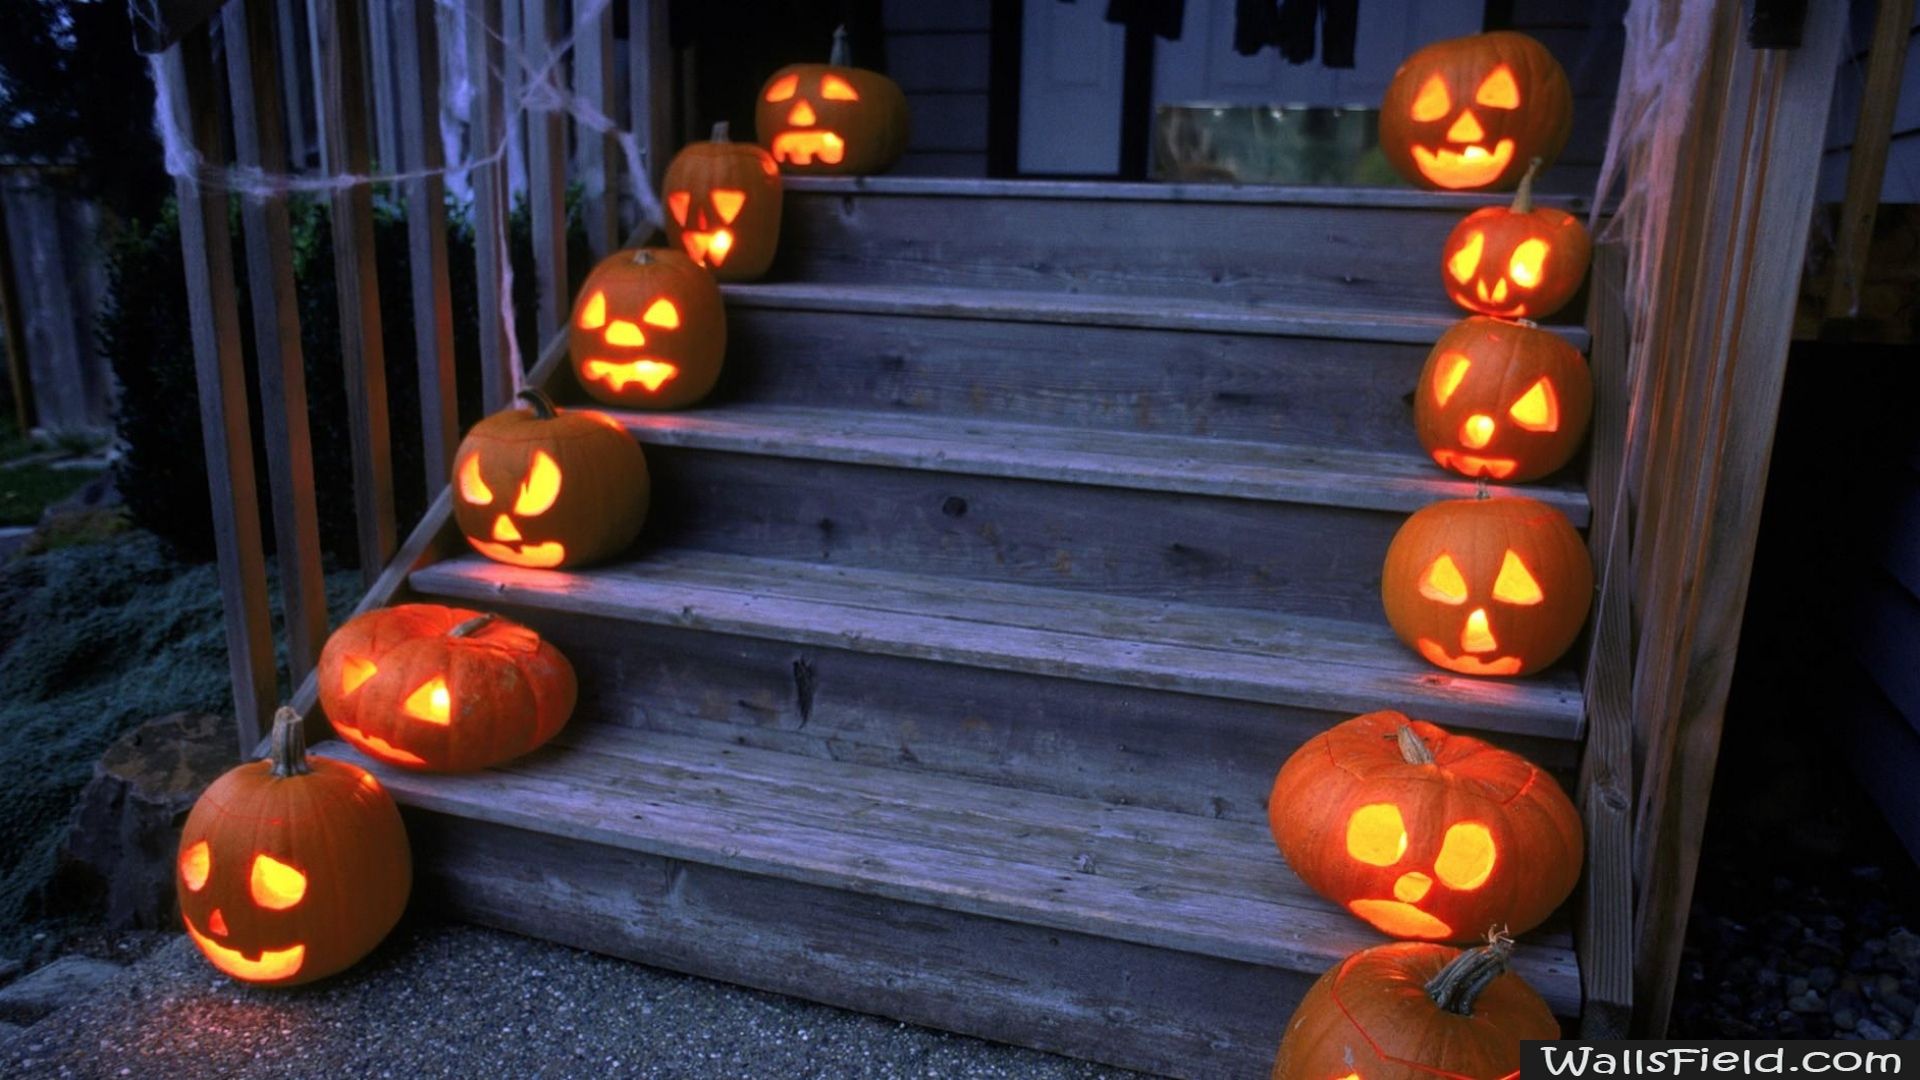 Pumpkins On Stairs.com. Free HD Wallpaper. Halloween lanterns, Halloween wallpaper, Halloween haunted house decorations